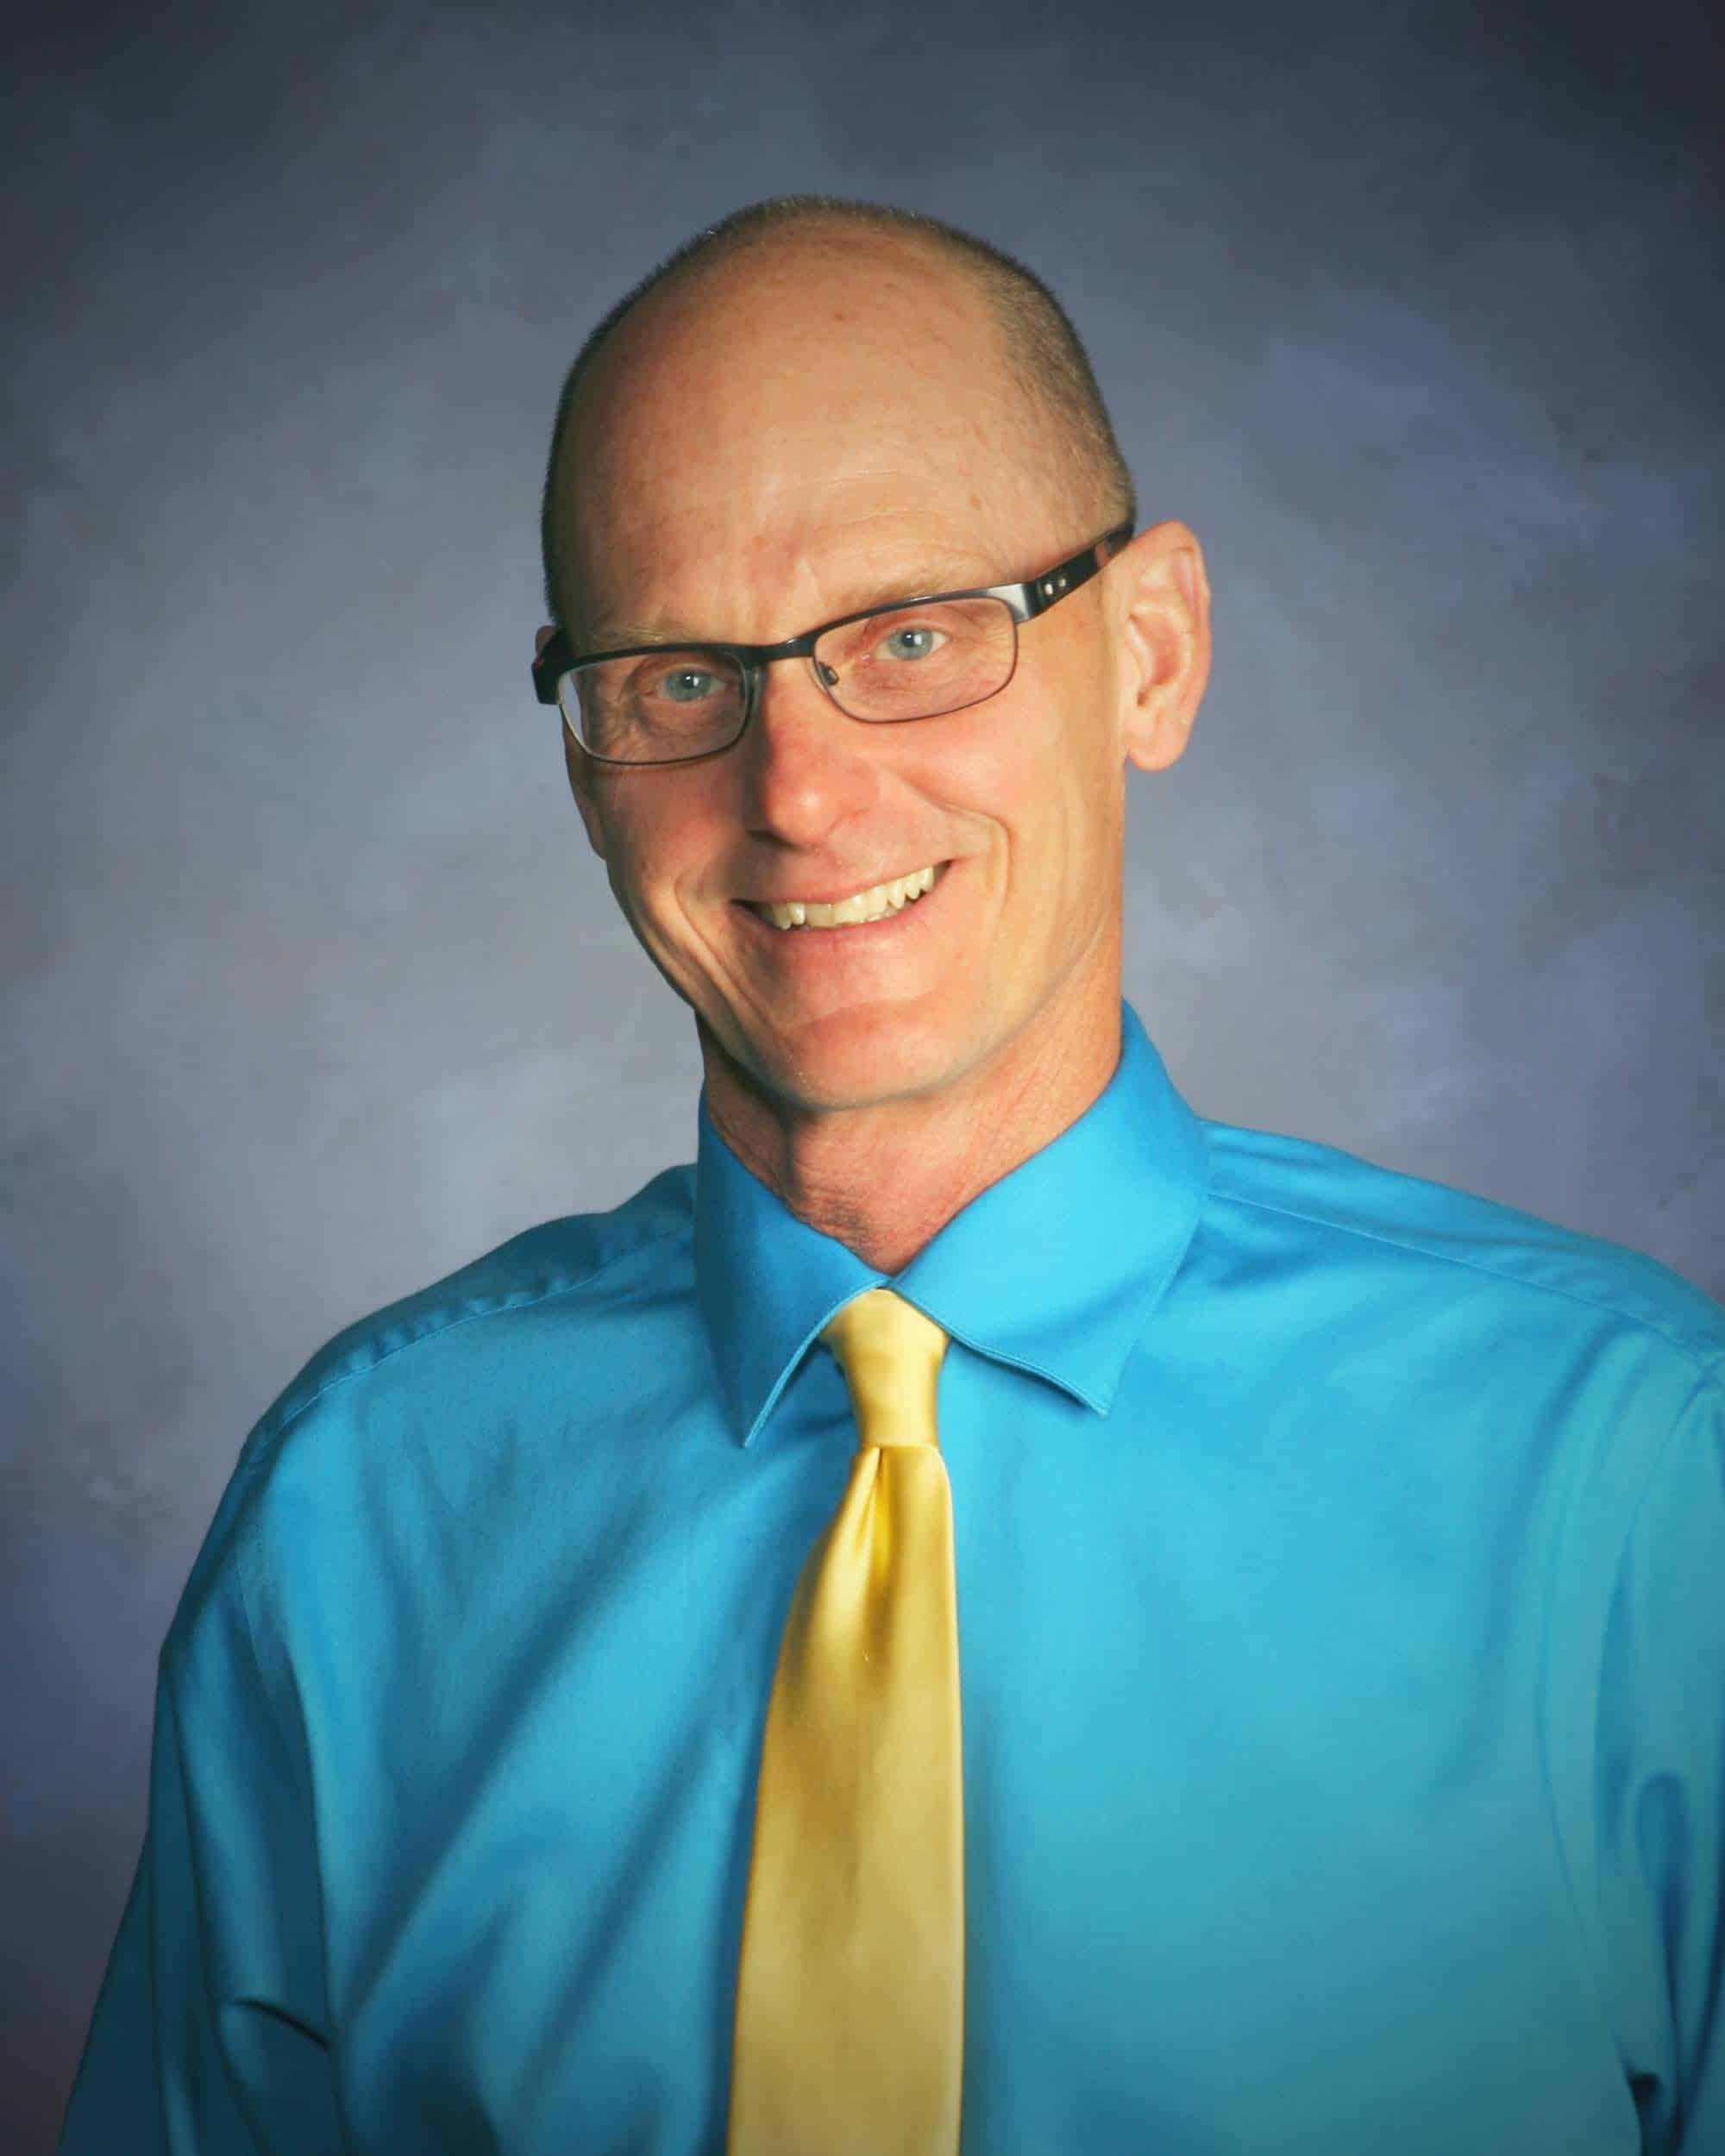 A bald man in glasses with a blue shirt and yellow tie smiles at the camera.